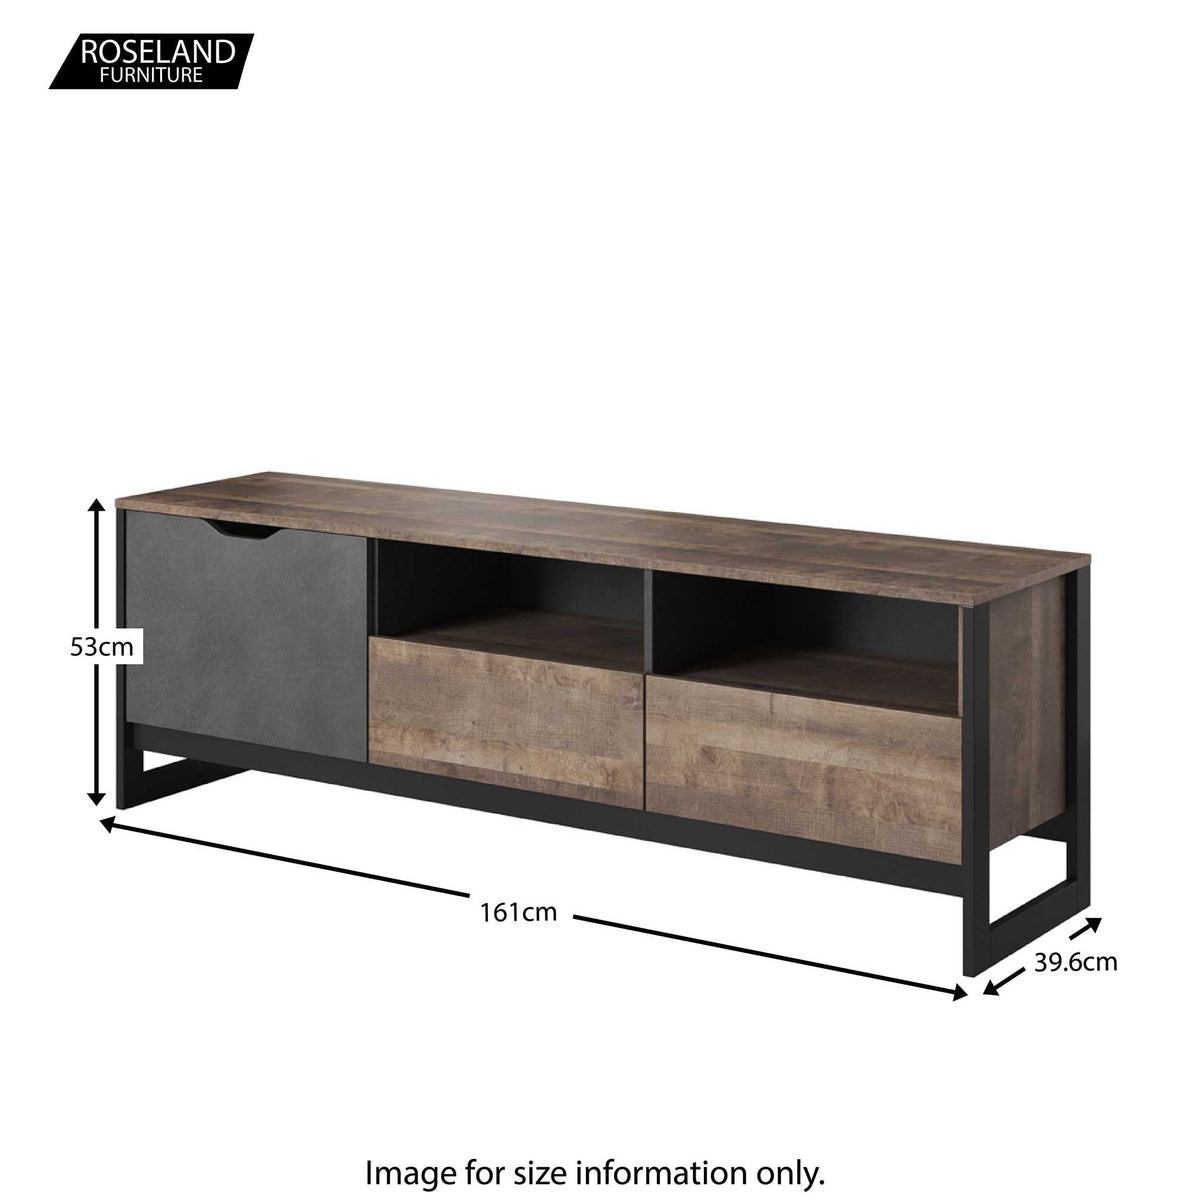 Ezra Large Industrial TV Stand - Size Guide